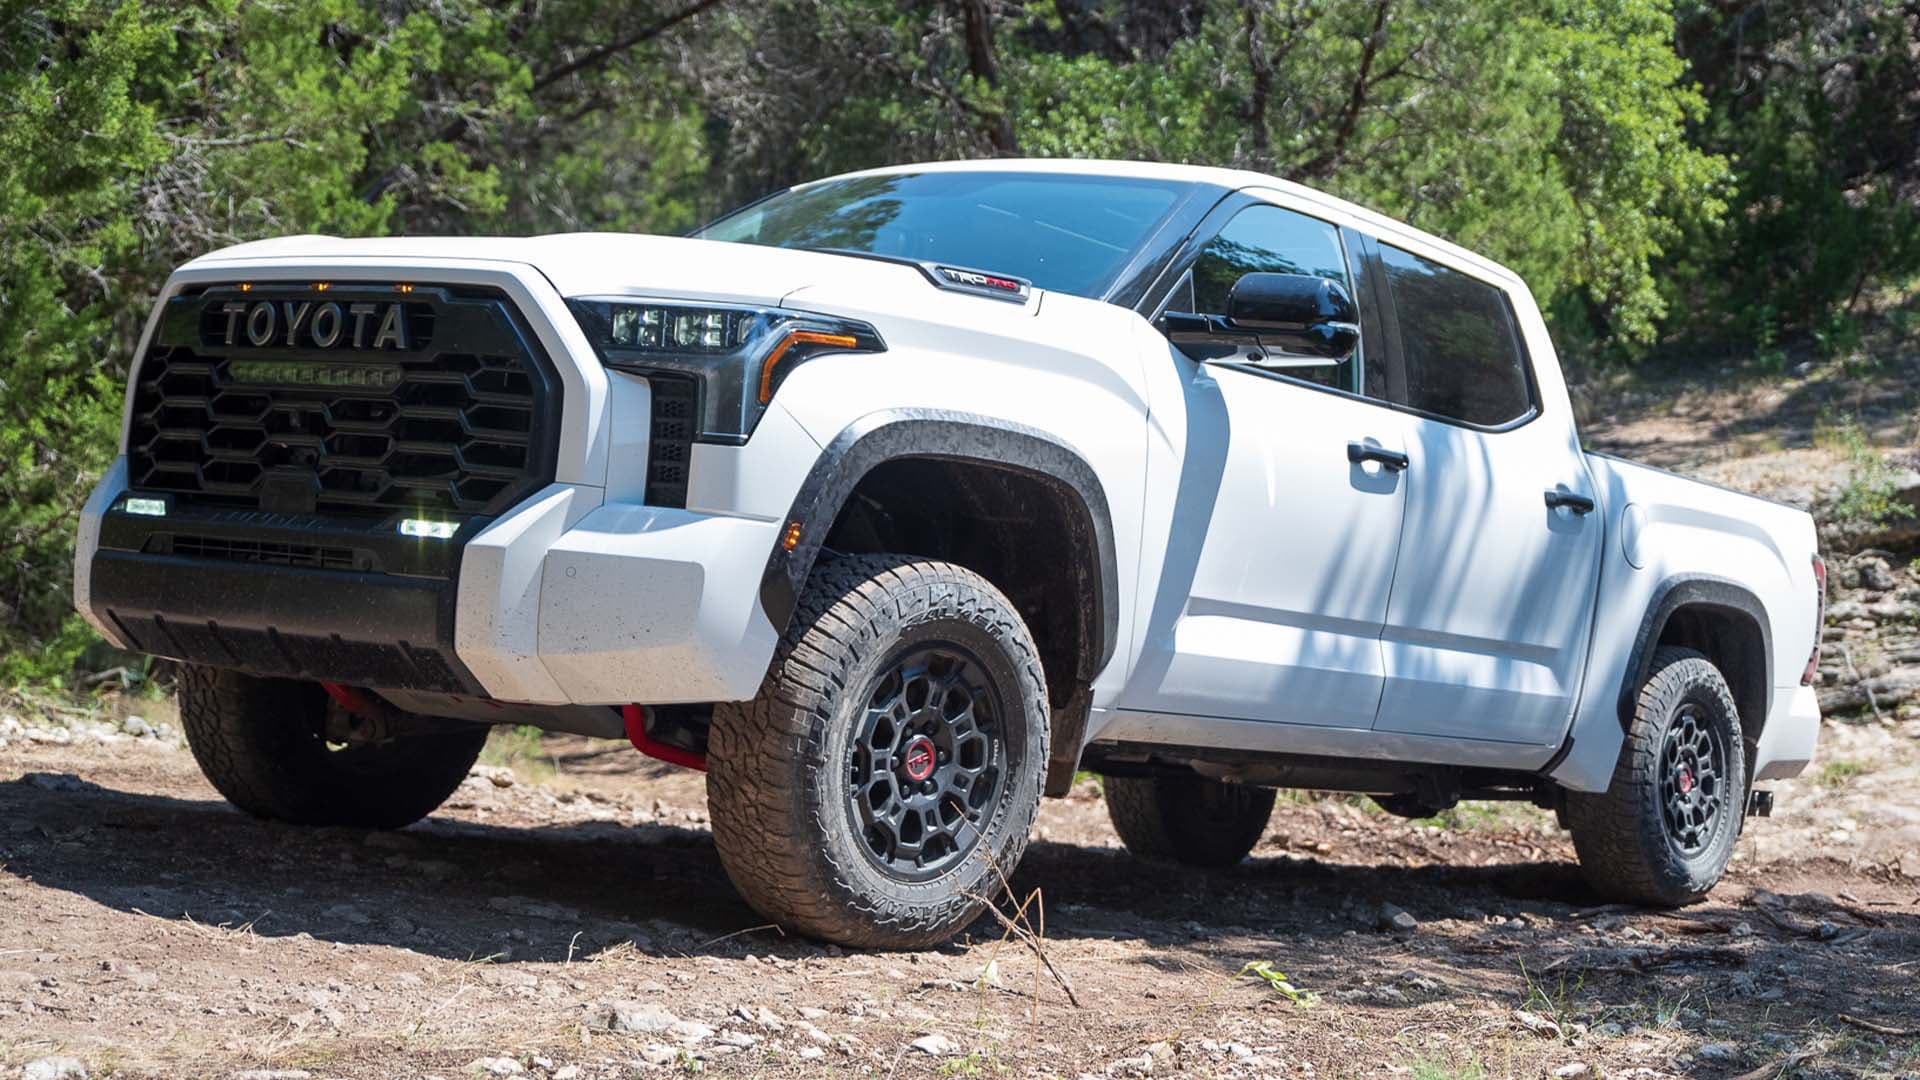 Reports Claim 18-Month Wait for the 2022 Toyota Tundra. That’s Not the Full Story